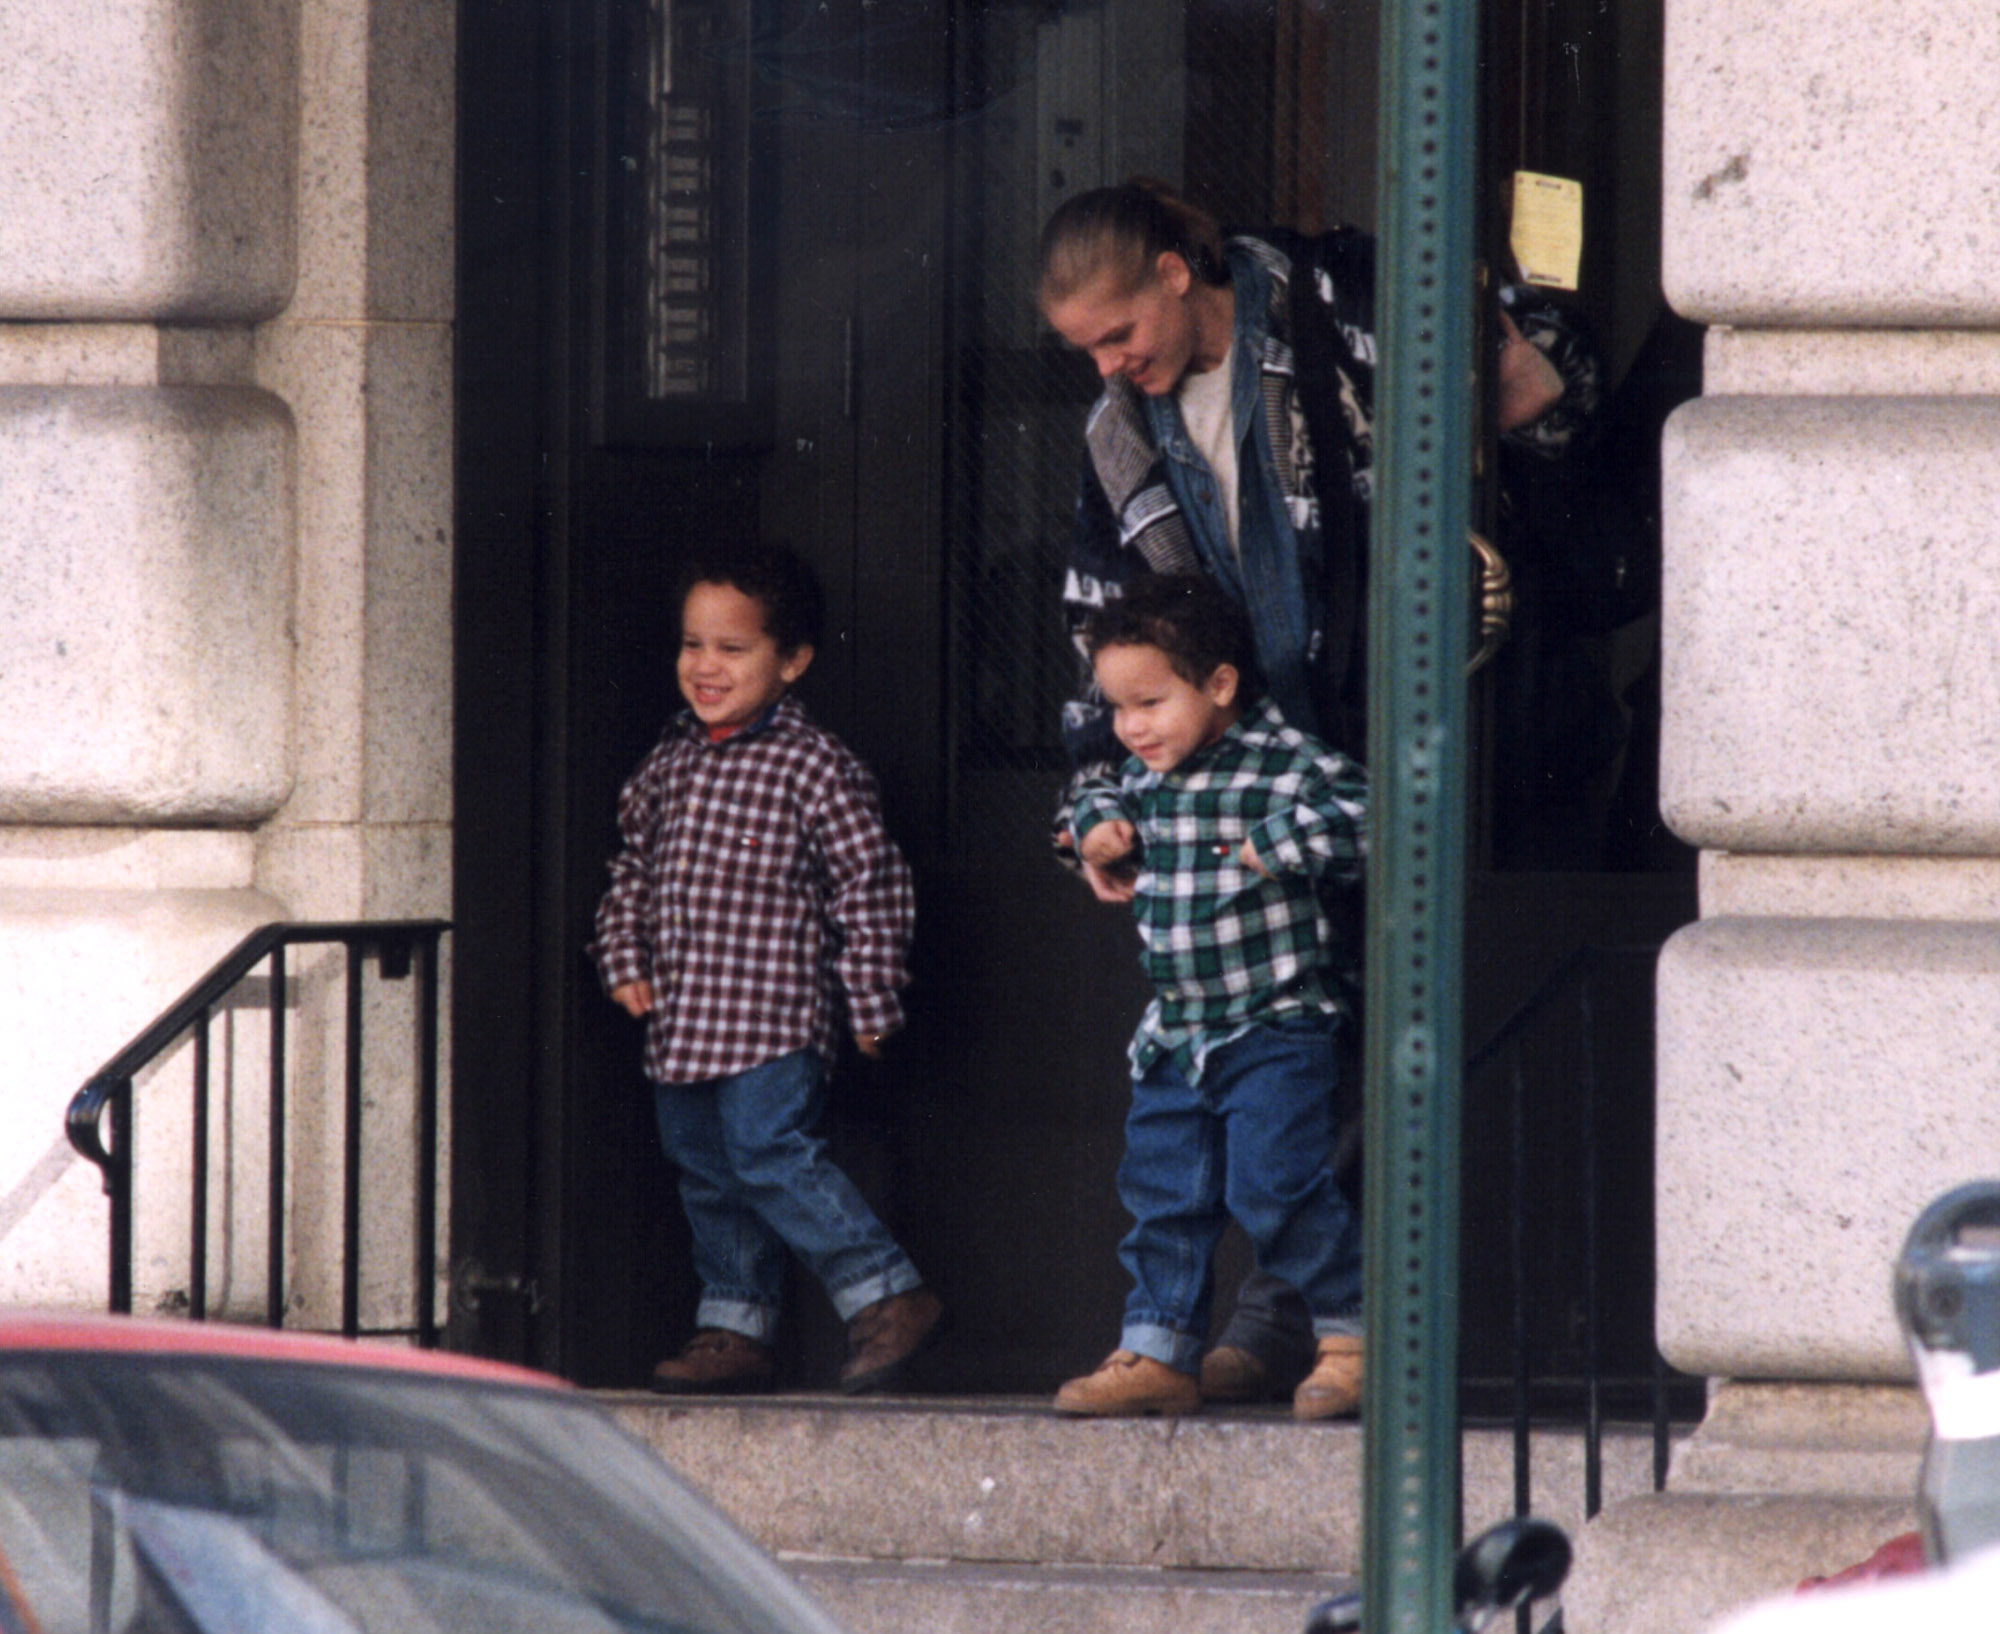 Toukie Smith and her twin boys Aaron and Julian, sons of Robert DeNiro, in New York, on November 6, 1998. | Source: Getty Images